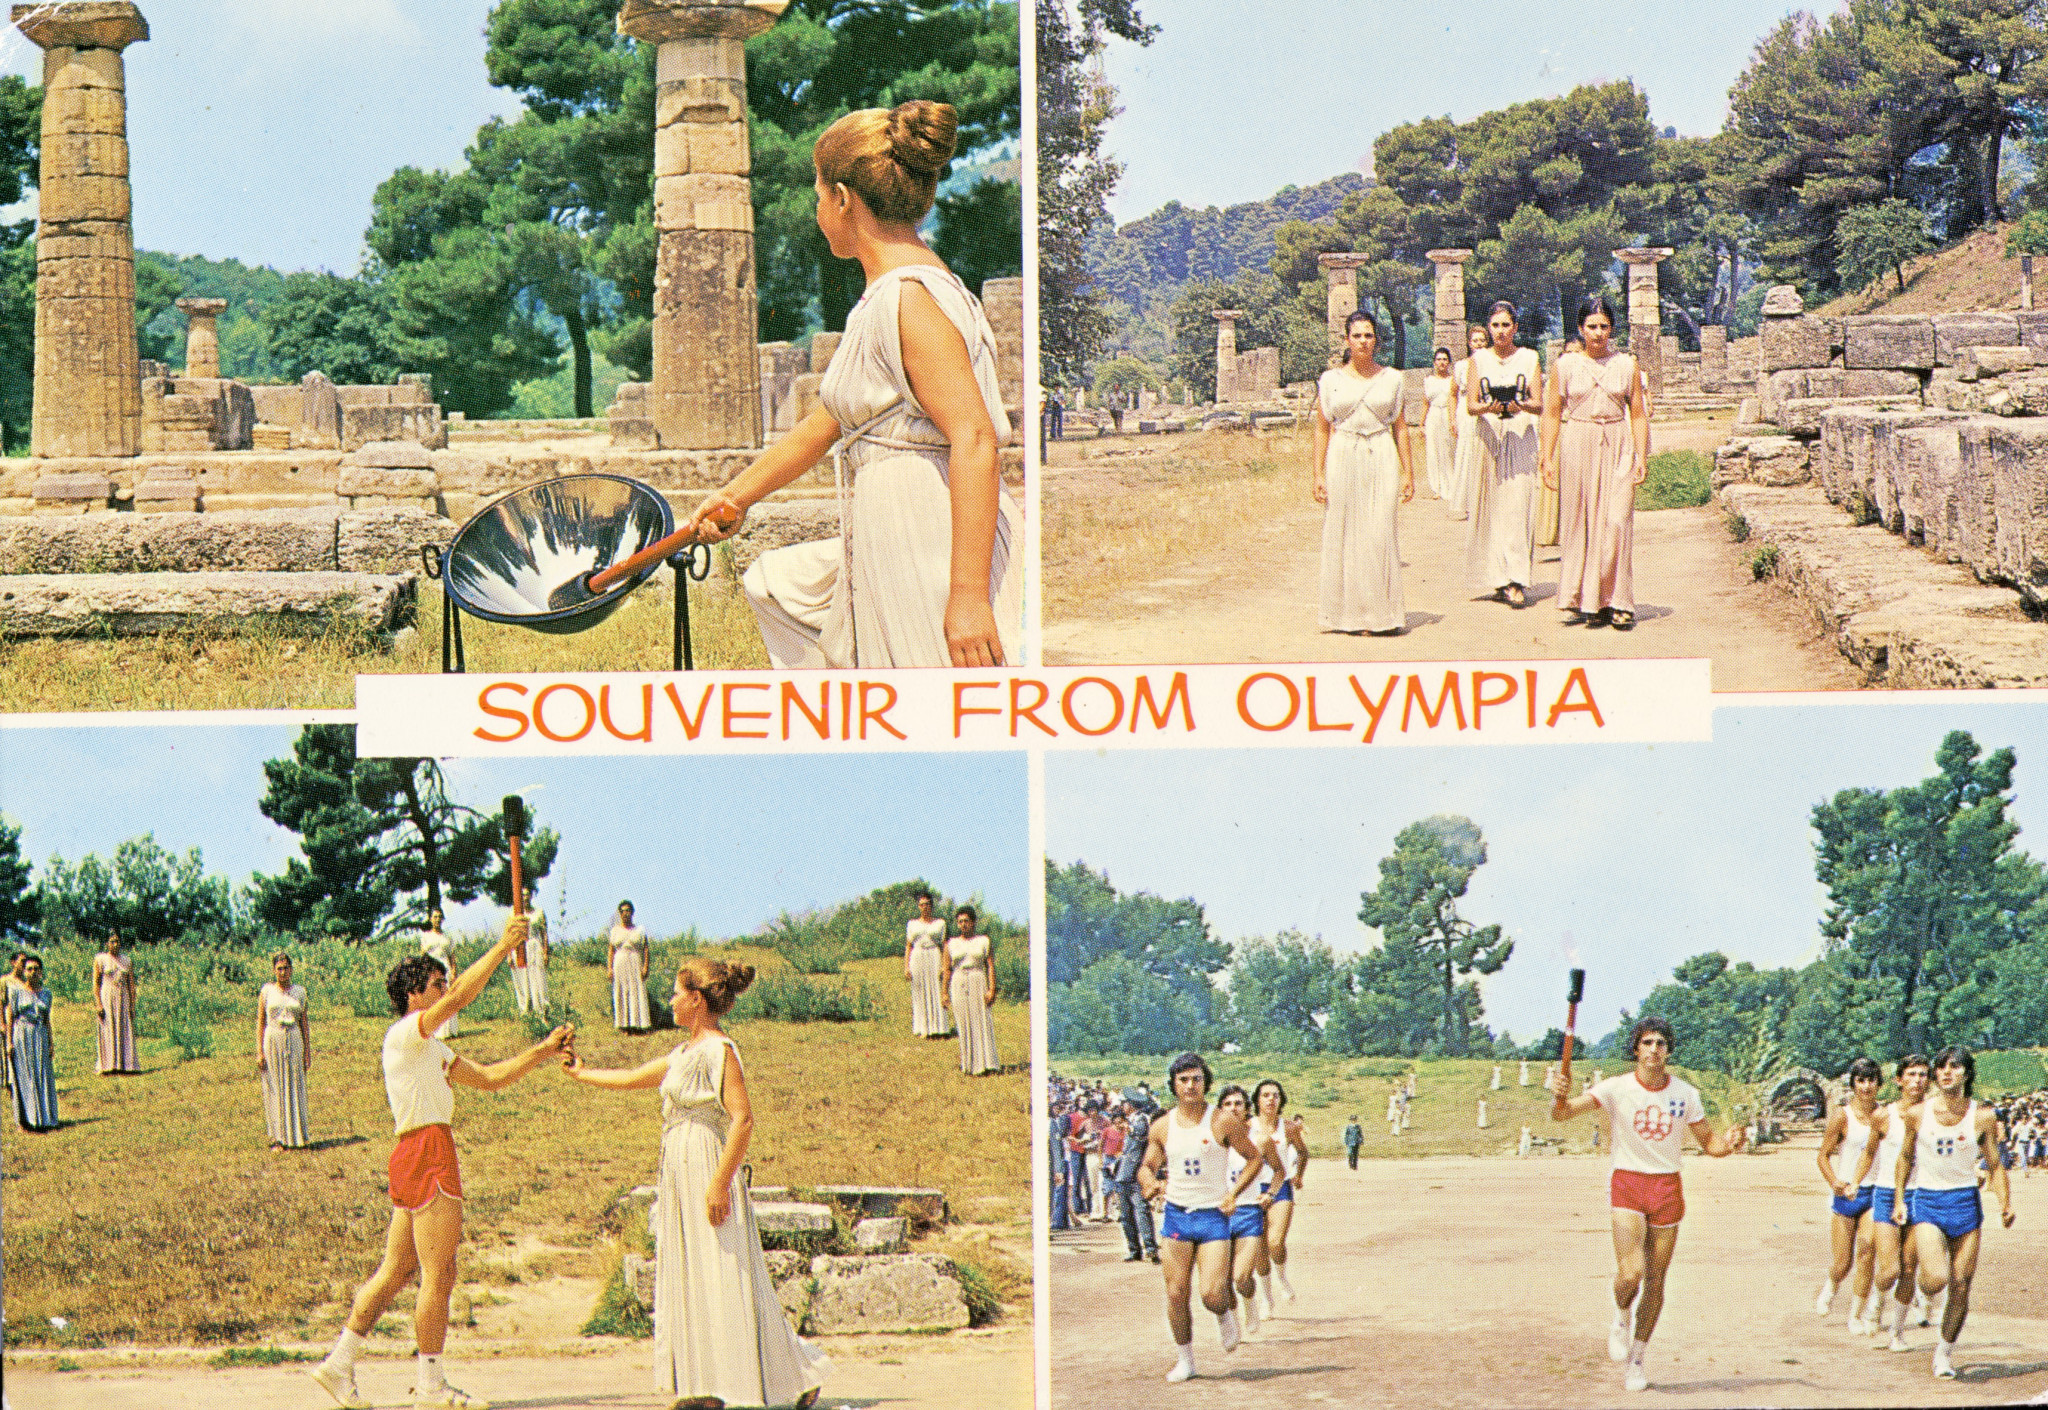 Moscholiou is depicted in this Souvenir from Olympia postcard ©Hellenic Olympic Committee